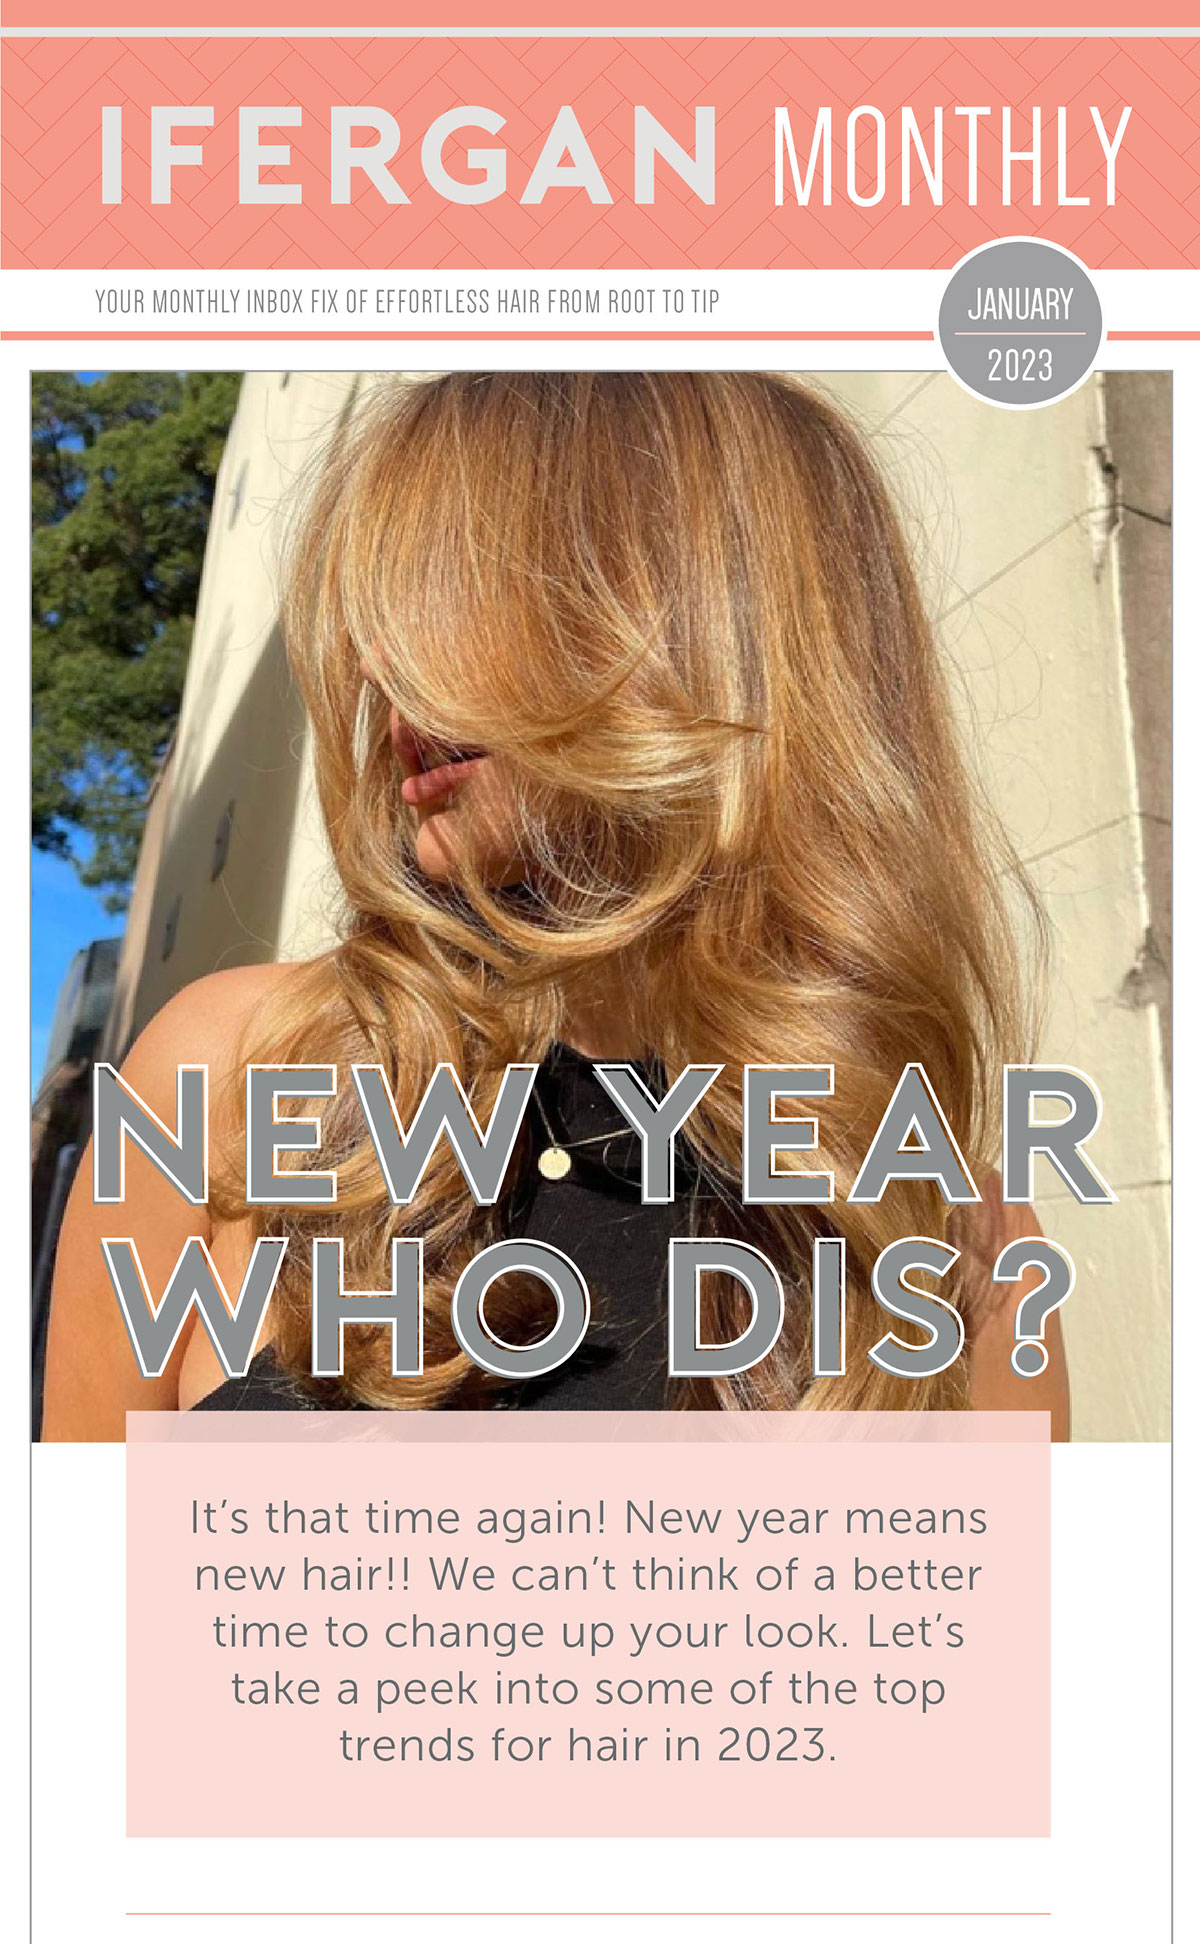 New Year Who Dis? It’s that time again! New year means new hair!! We can’t think of a better time to change up your look. Let's take a peek into some of the top trends for hair in 2023. 